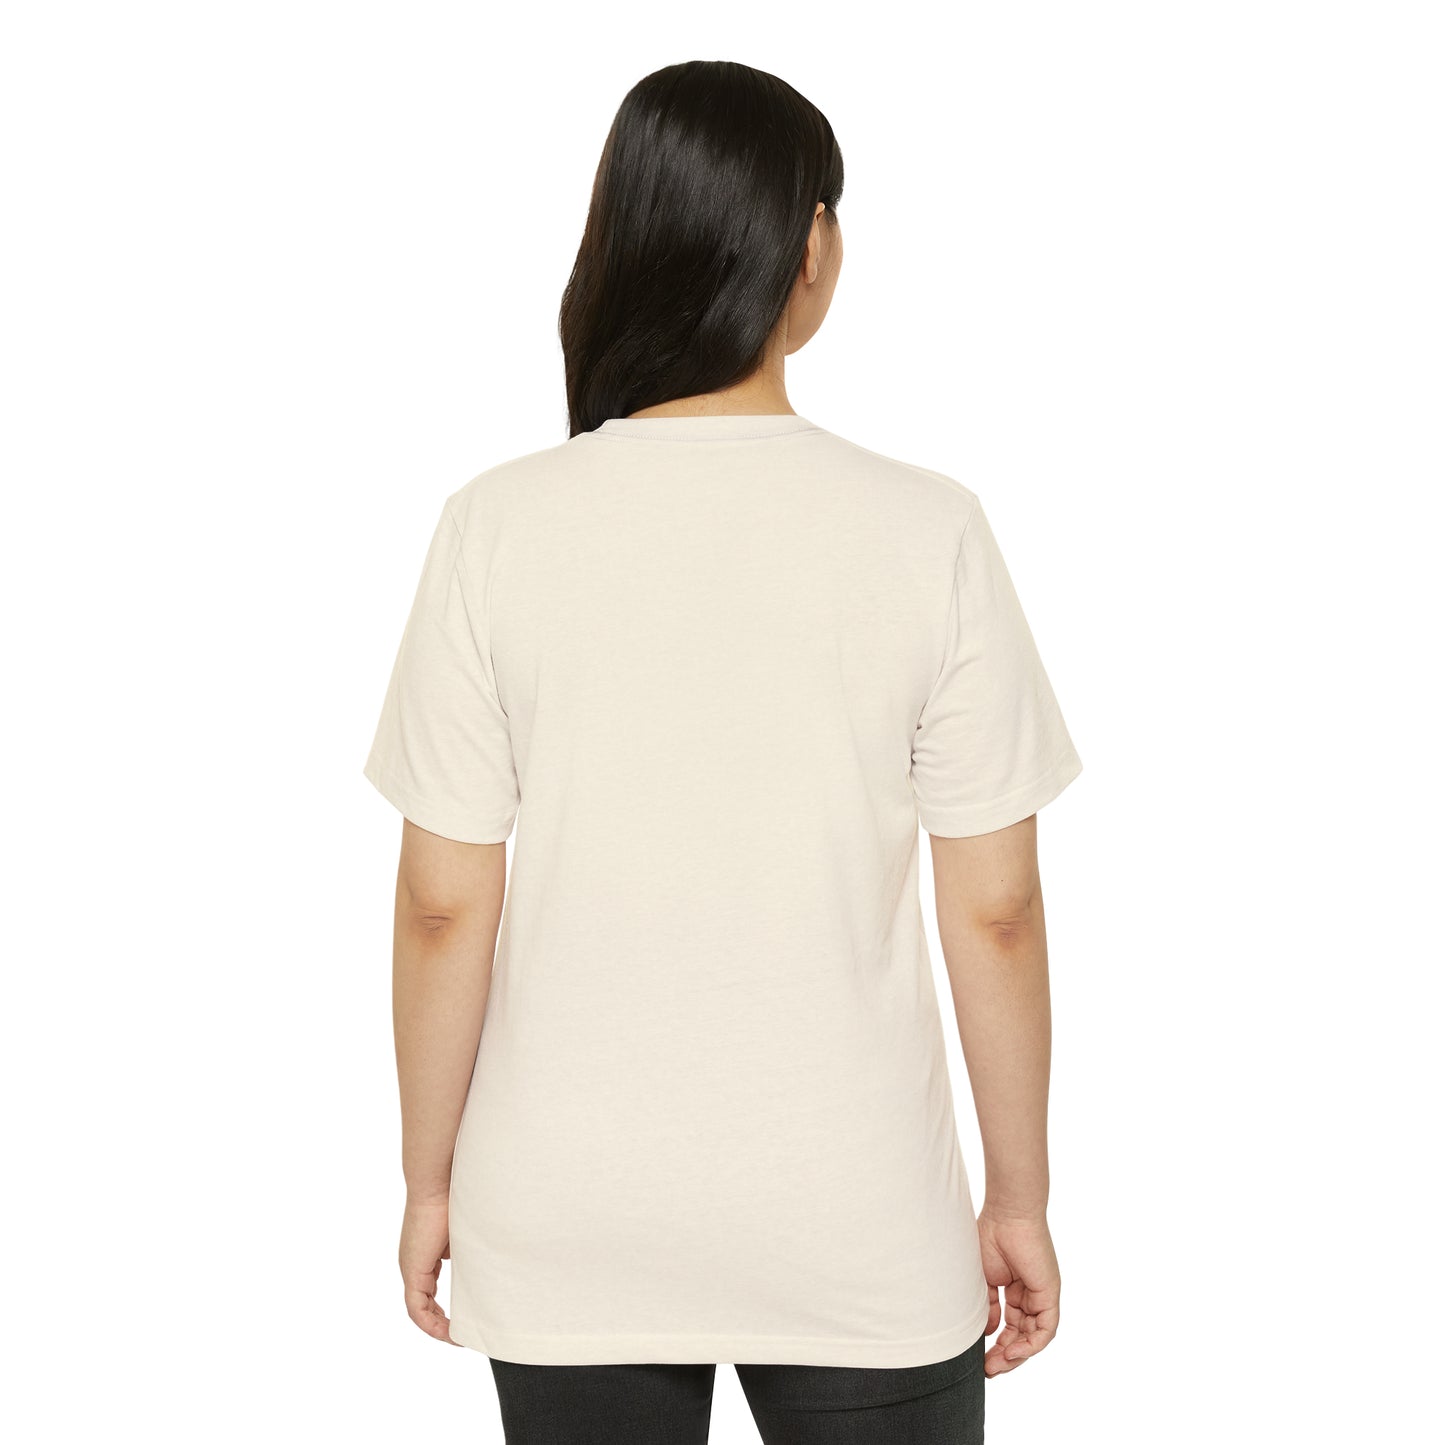 Recycled Organic T-Shirt modern semi-relaxed fit trendy high neckline